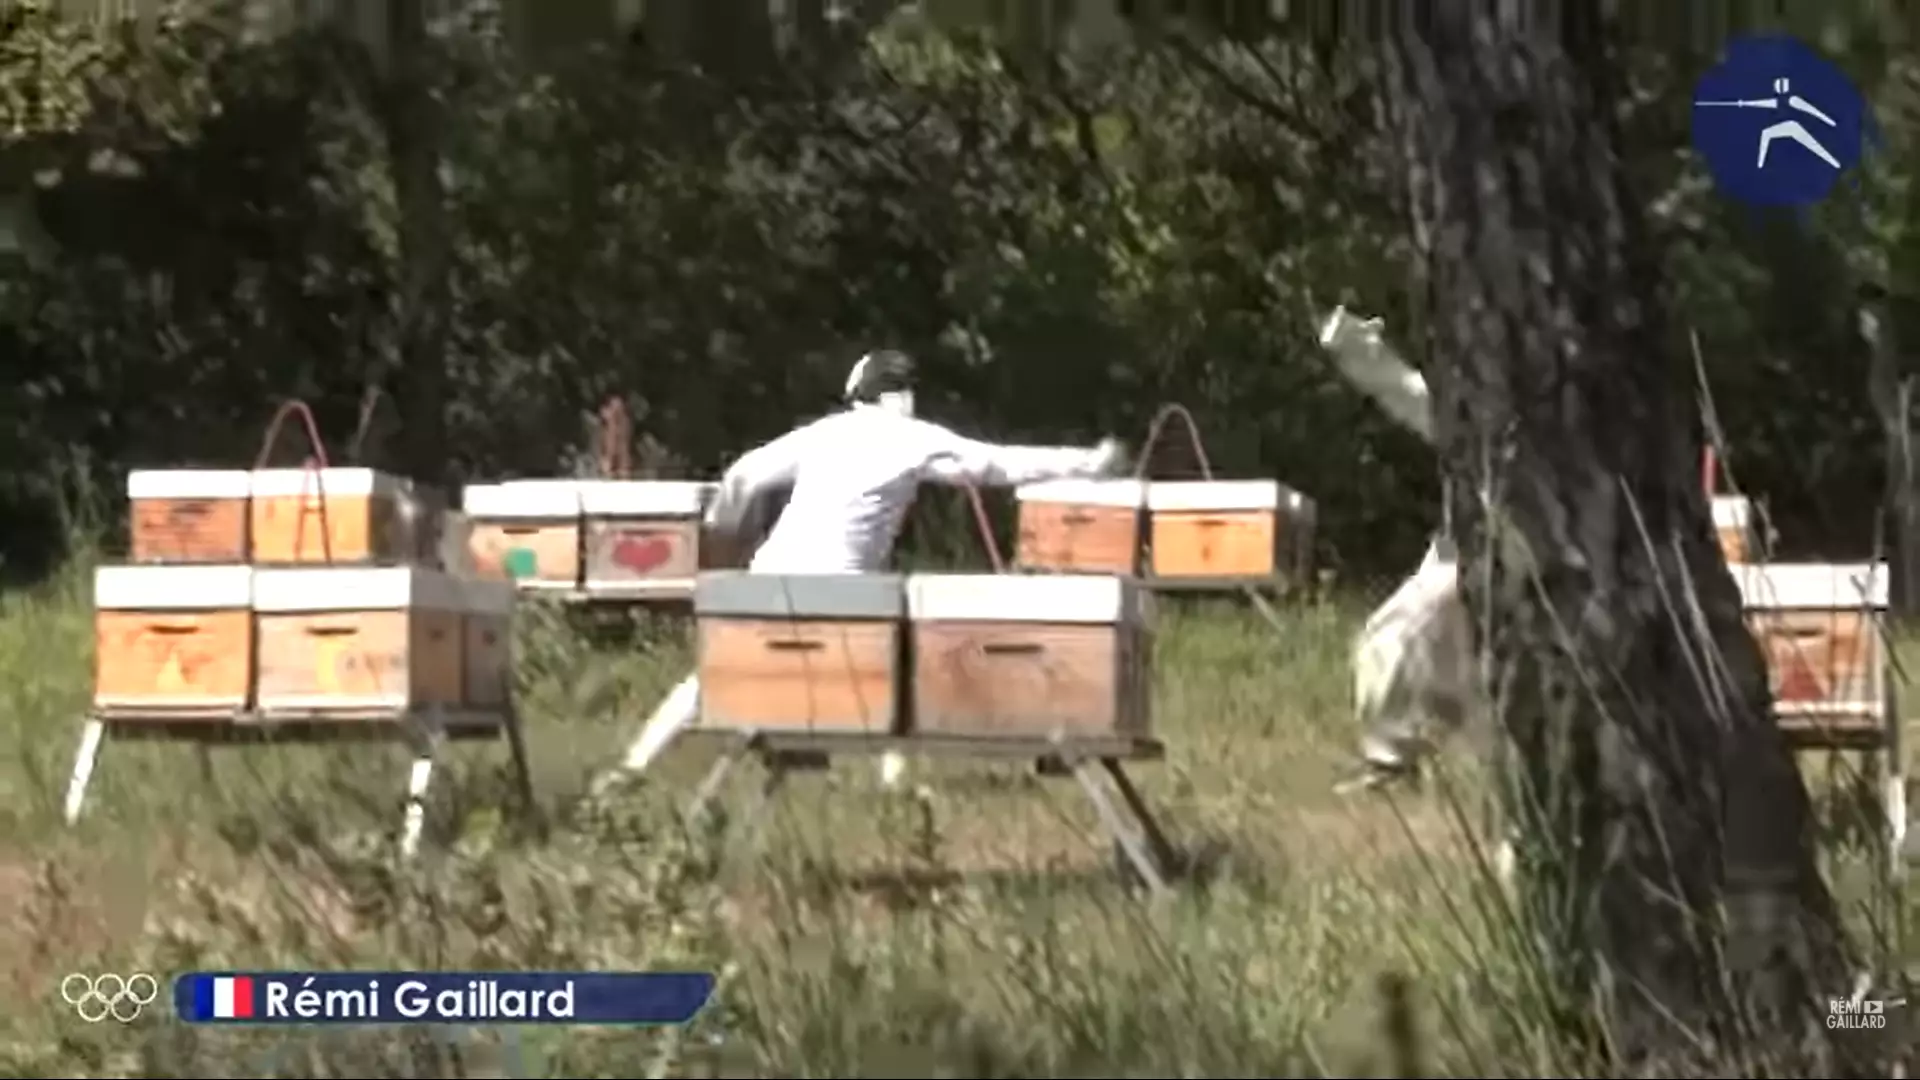 Fencing against a beekeeper.